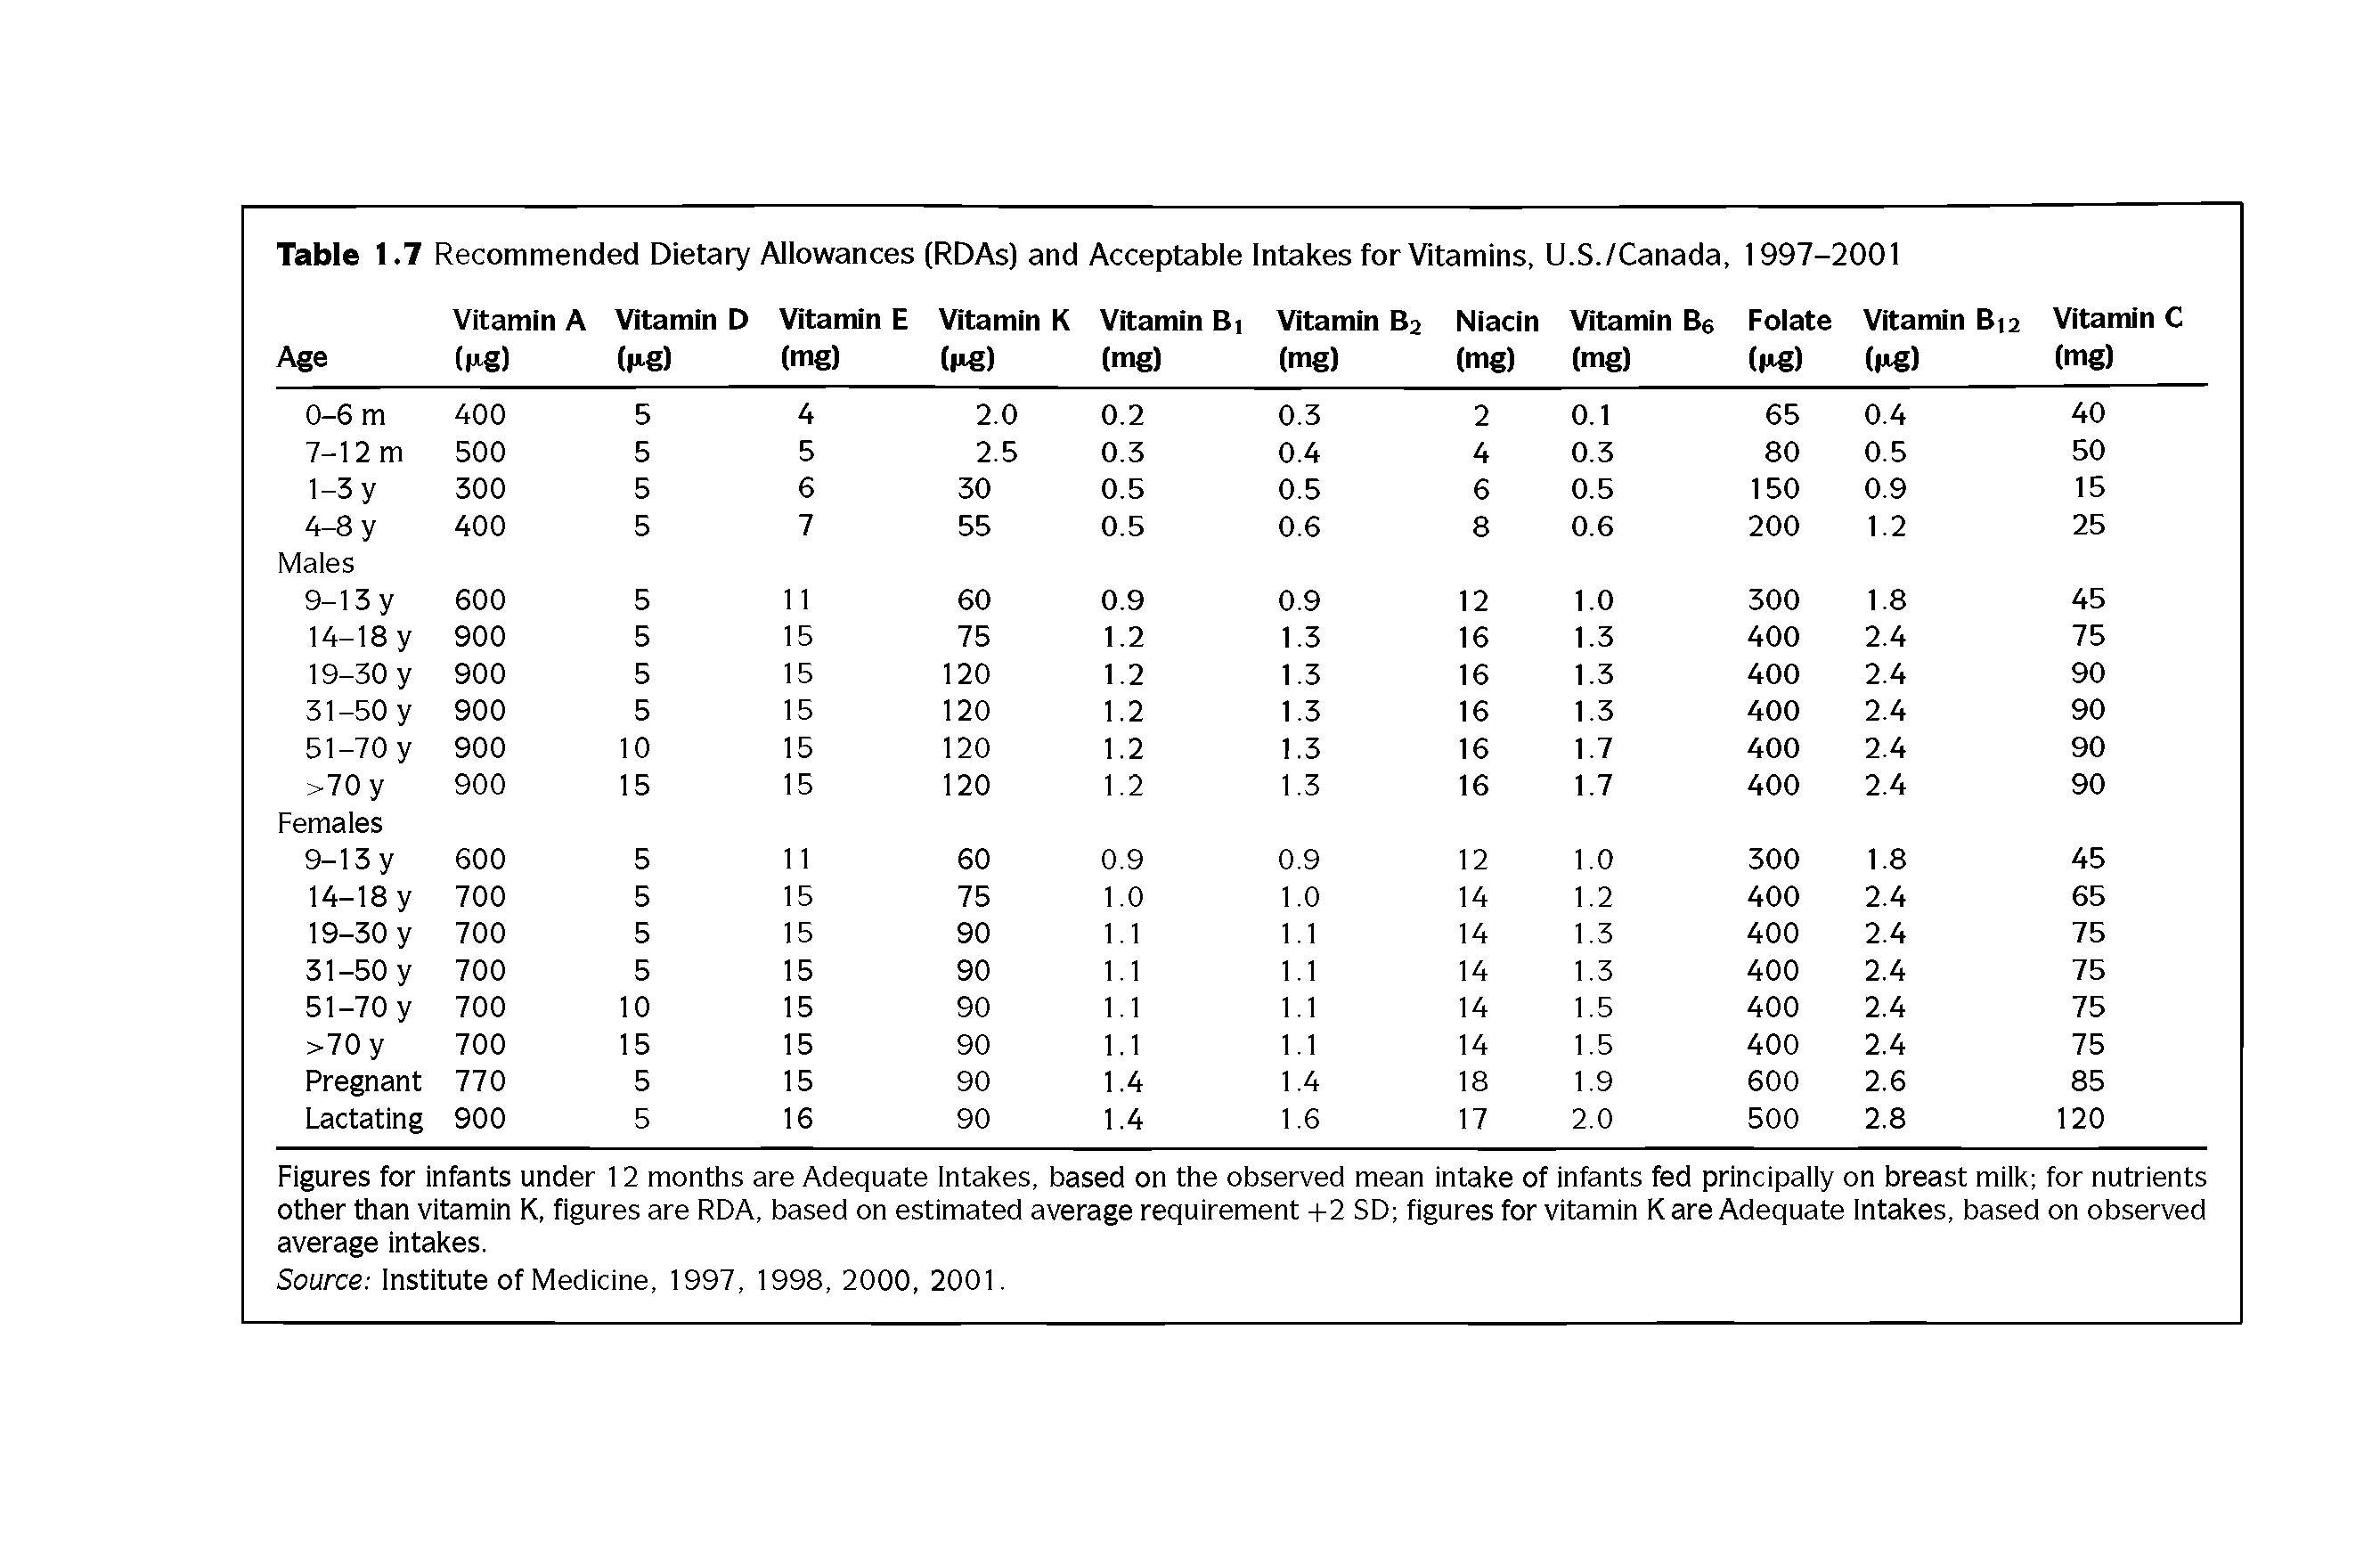 Figures for infants under 12 months are Adequate Intakes, based on the observed mean intake of infants fed principally on breast milk for nutrients other than vitamin K, figures are RDA, based on estimated average requirement +2 SD figures for vitamin K are Adequate Intakes, based on observed ...